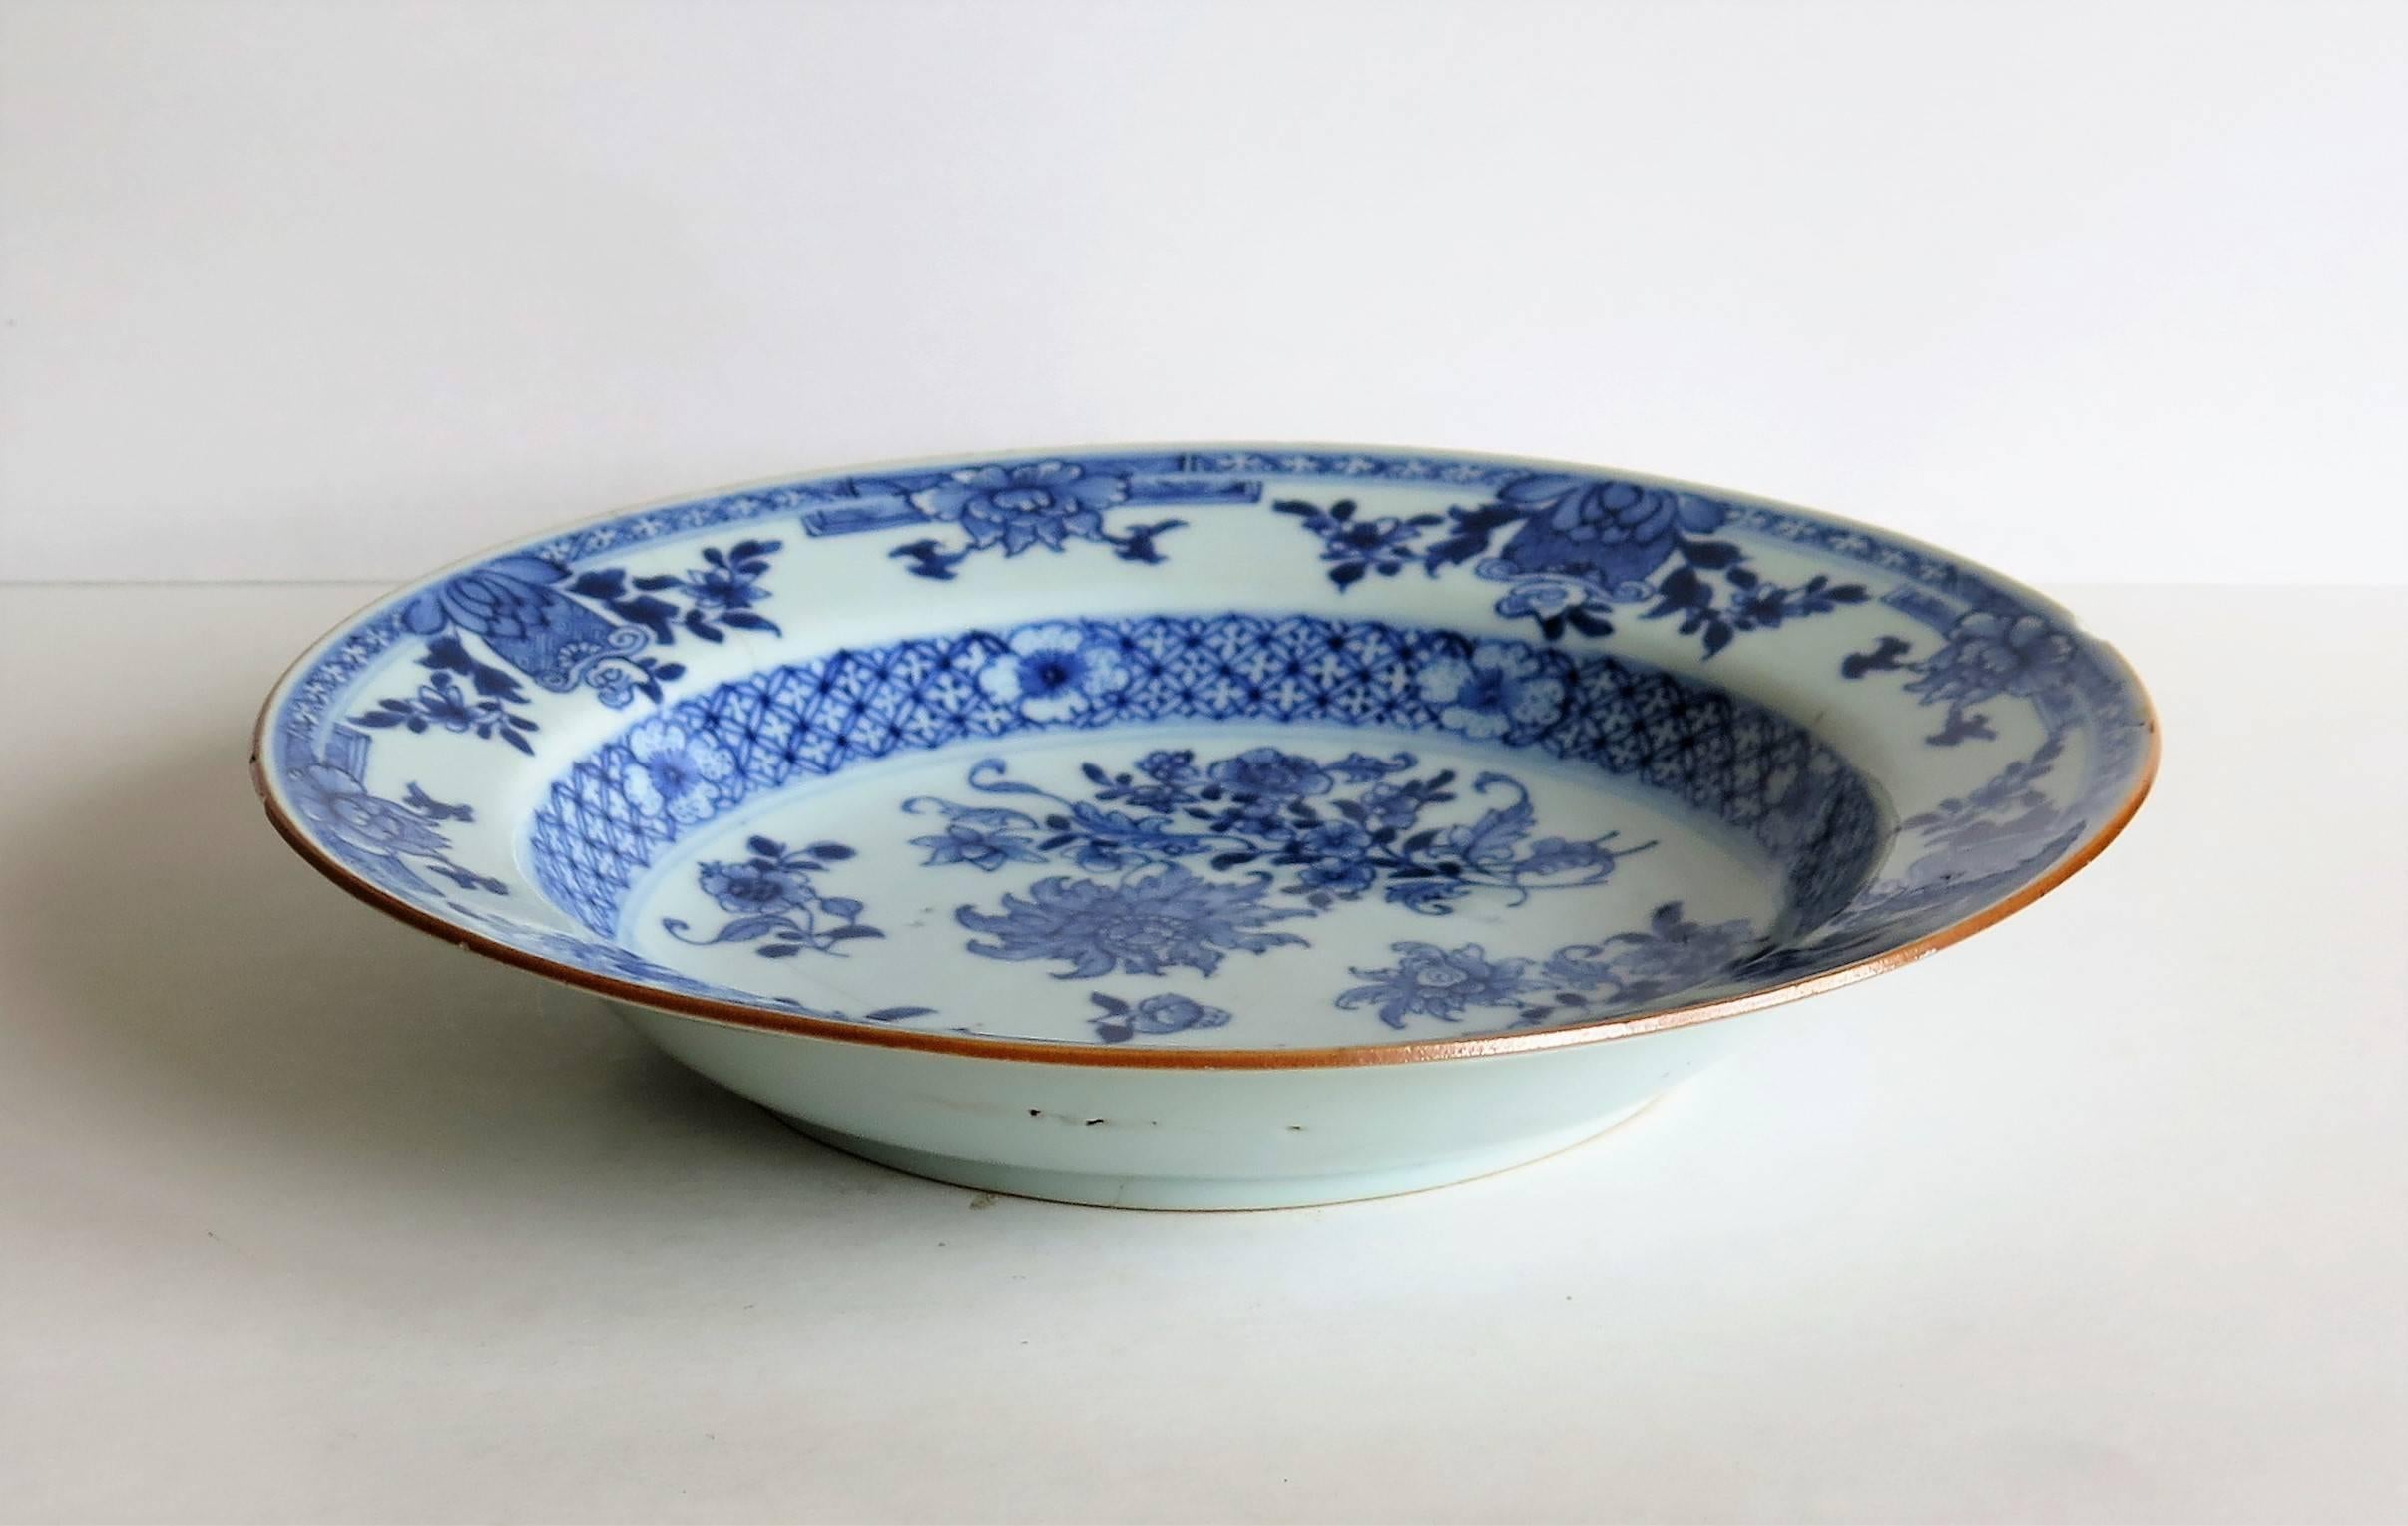 Chinese Porcelain Plate or Bowl, Blue and White, Floral Sprigs, circa 1770 2